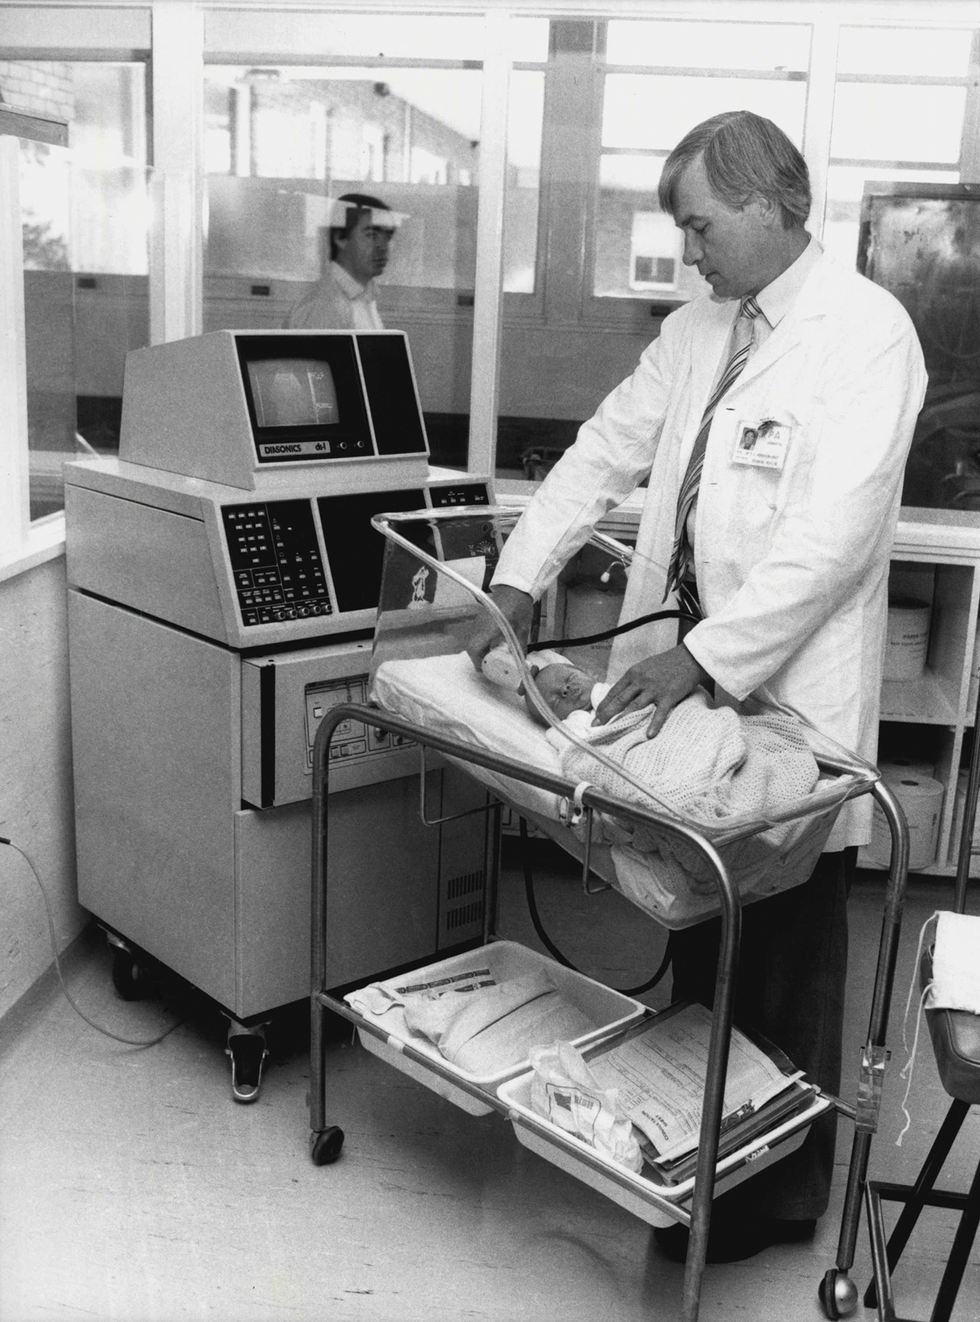 Black and white photo of a man taking an ultrasound image of a baby in a crib using old, bulky ultrasound equipment